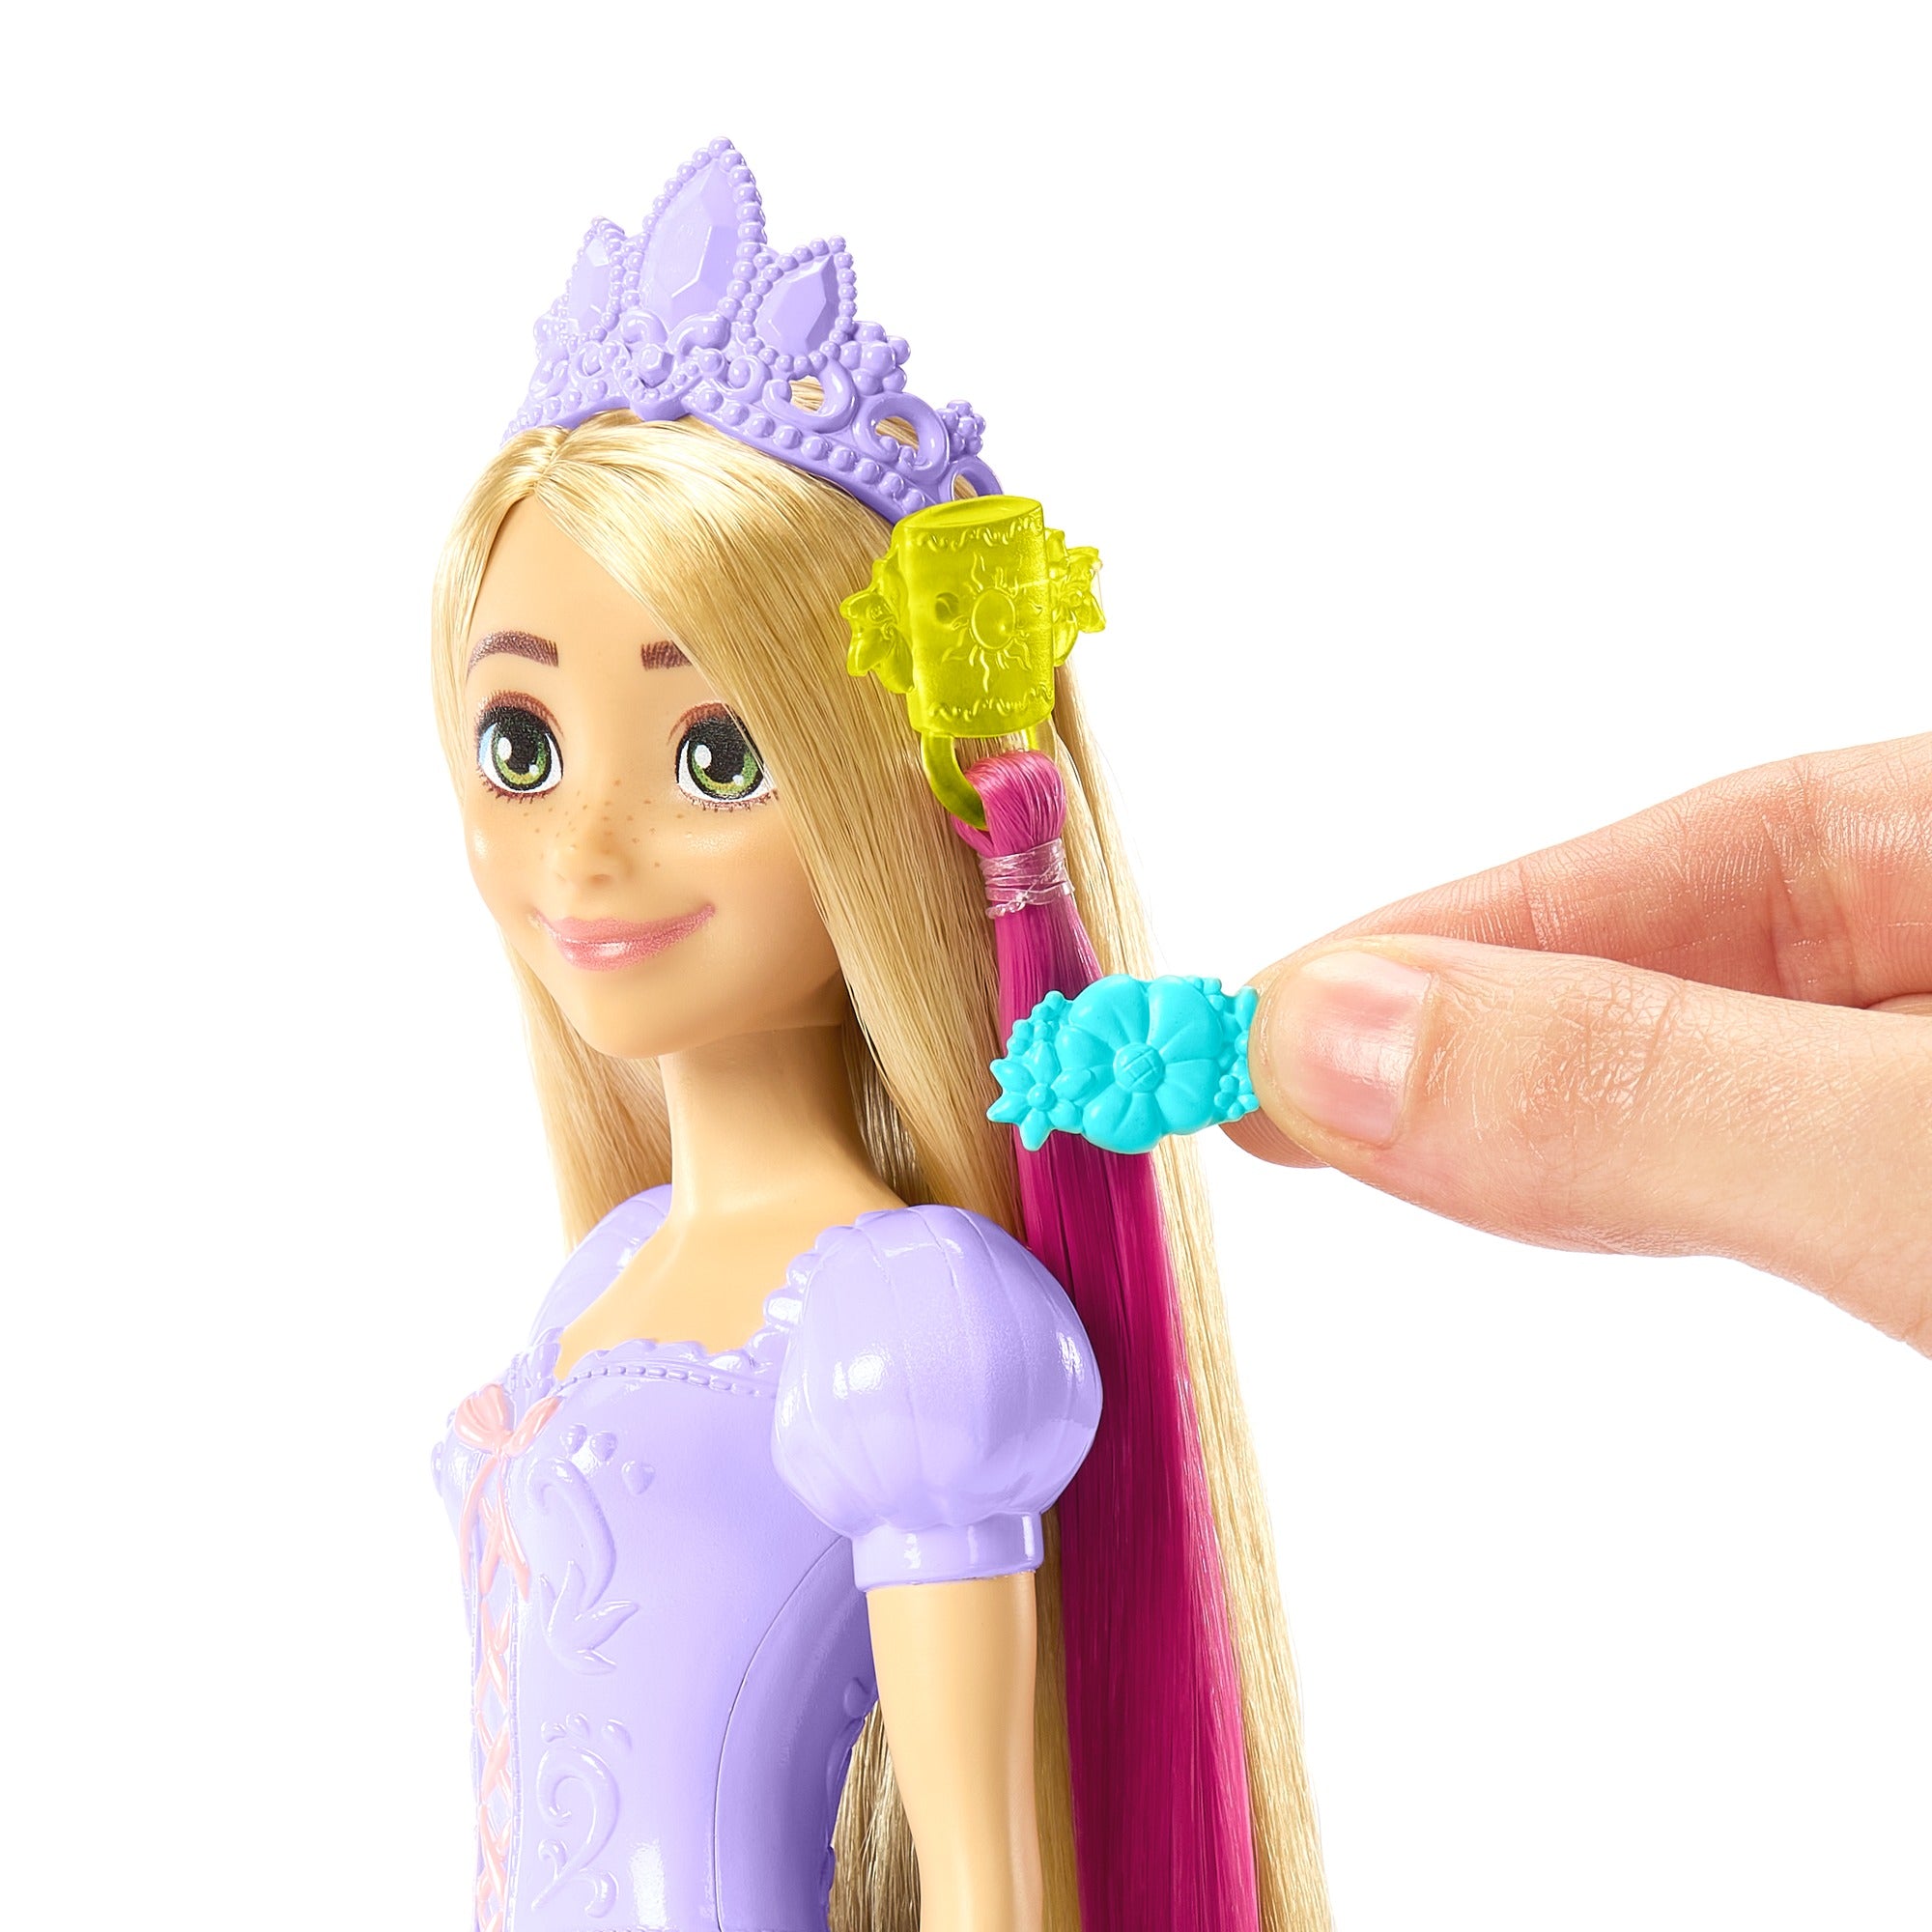 Disney Princess Rapunzel Doll with Color-Change Hair Extensions and Hair-Styling Pieces Inspired by the Disney Movie for Kids Ages 3+